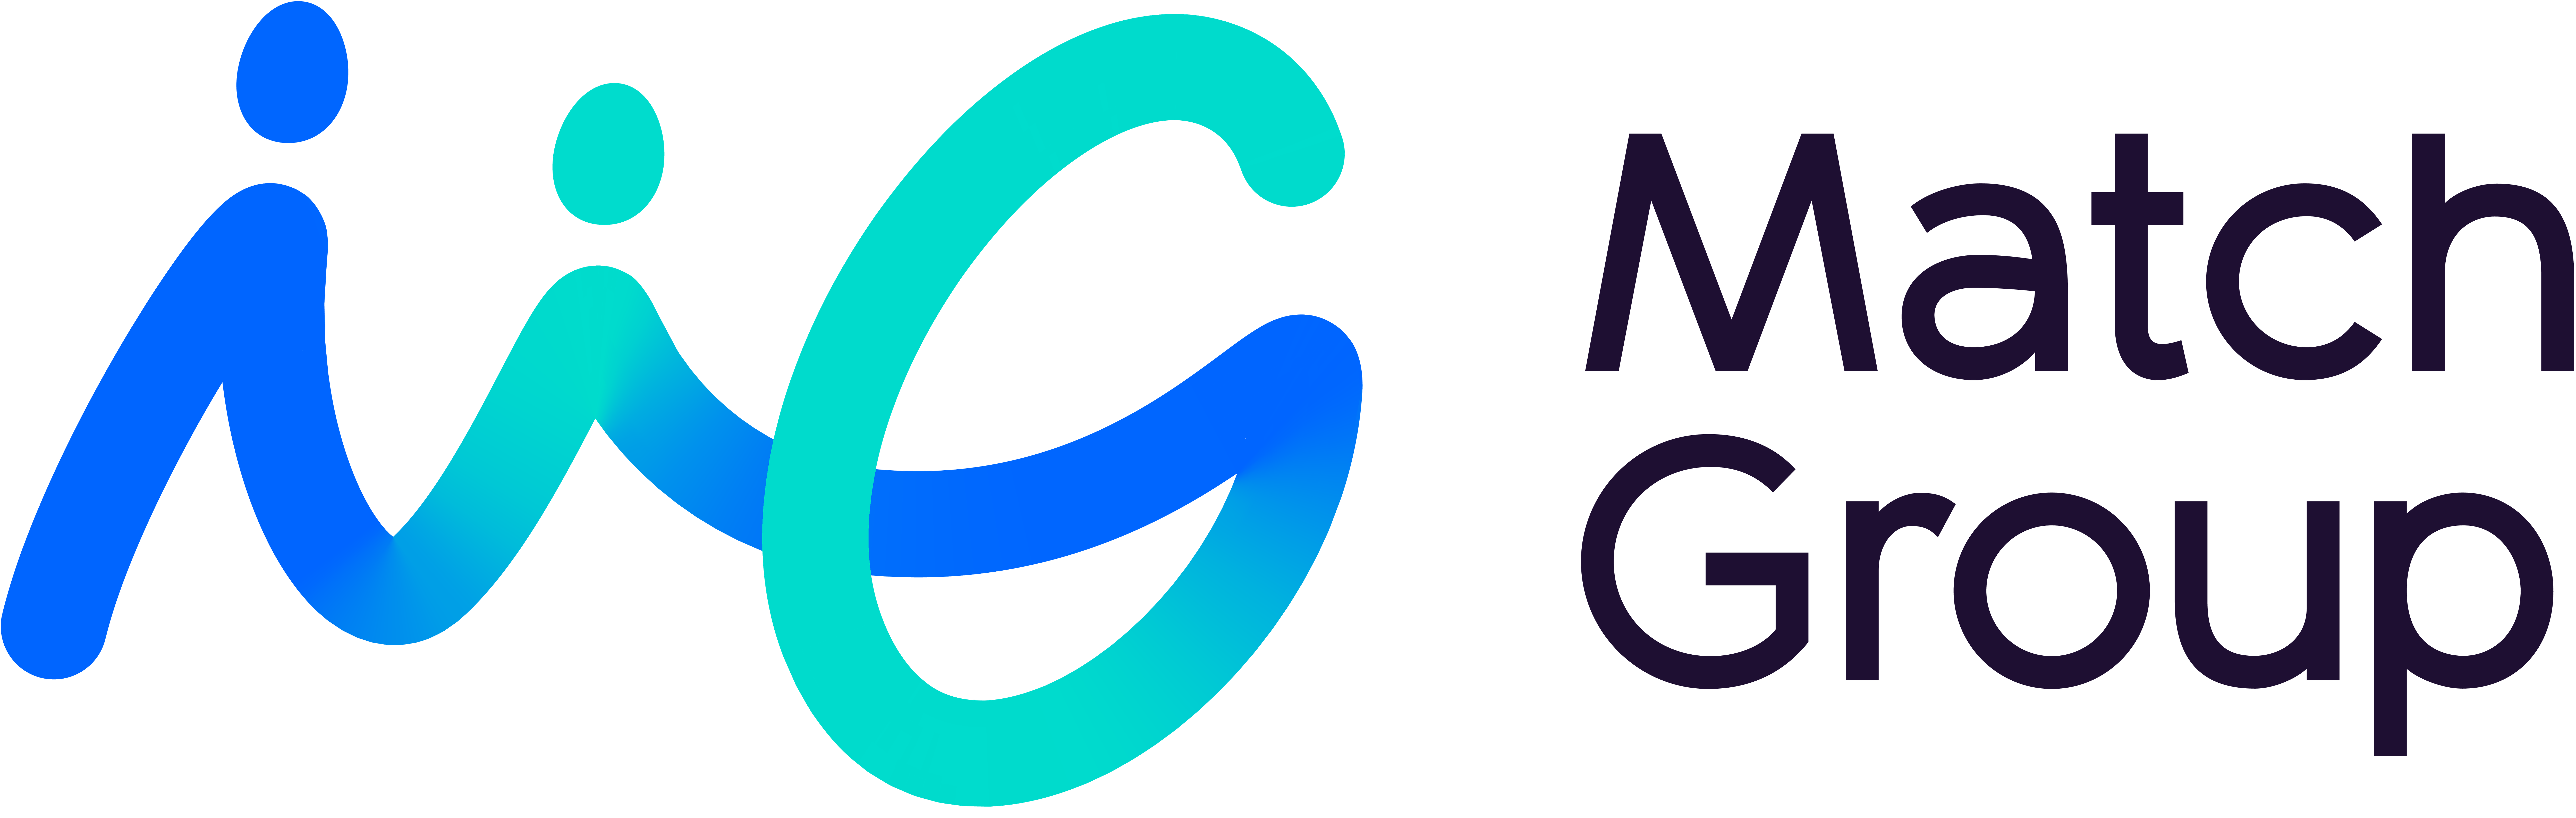 Match Group wordmark with blue and turquoise logo